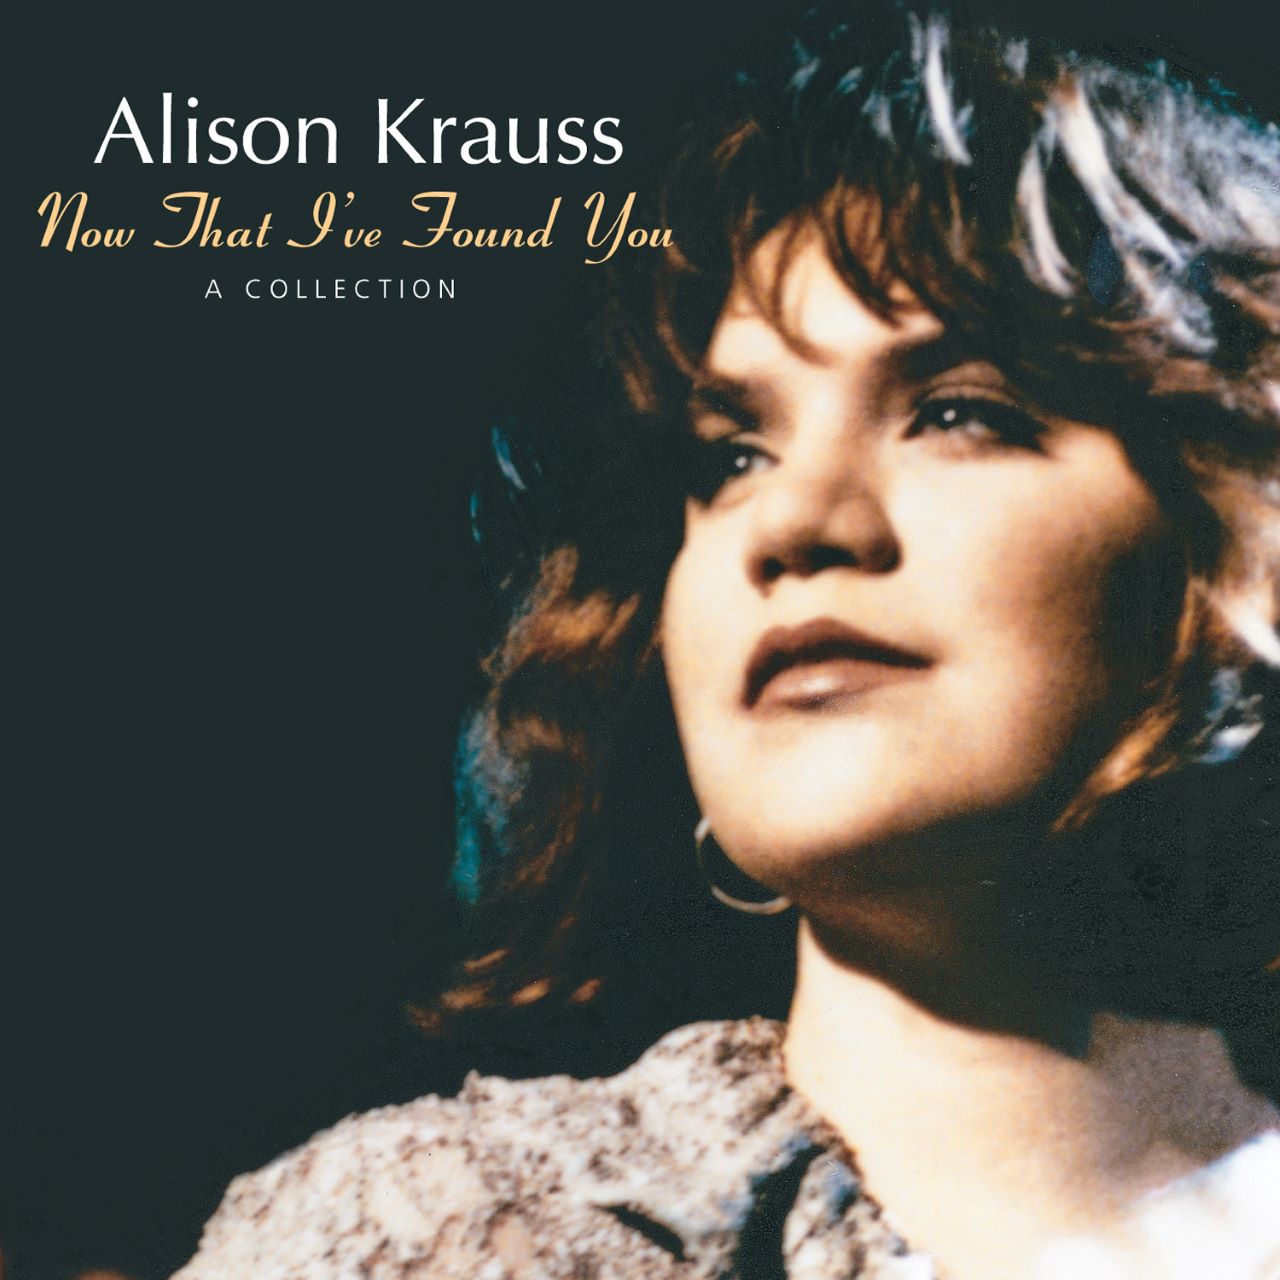 Alison Krauss – Now That I've Found You cover album